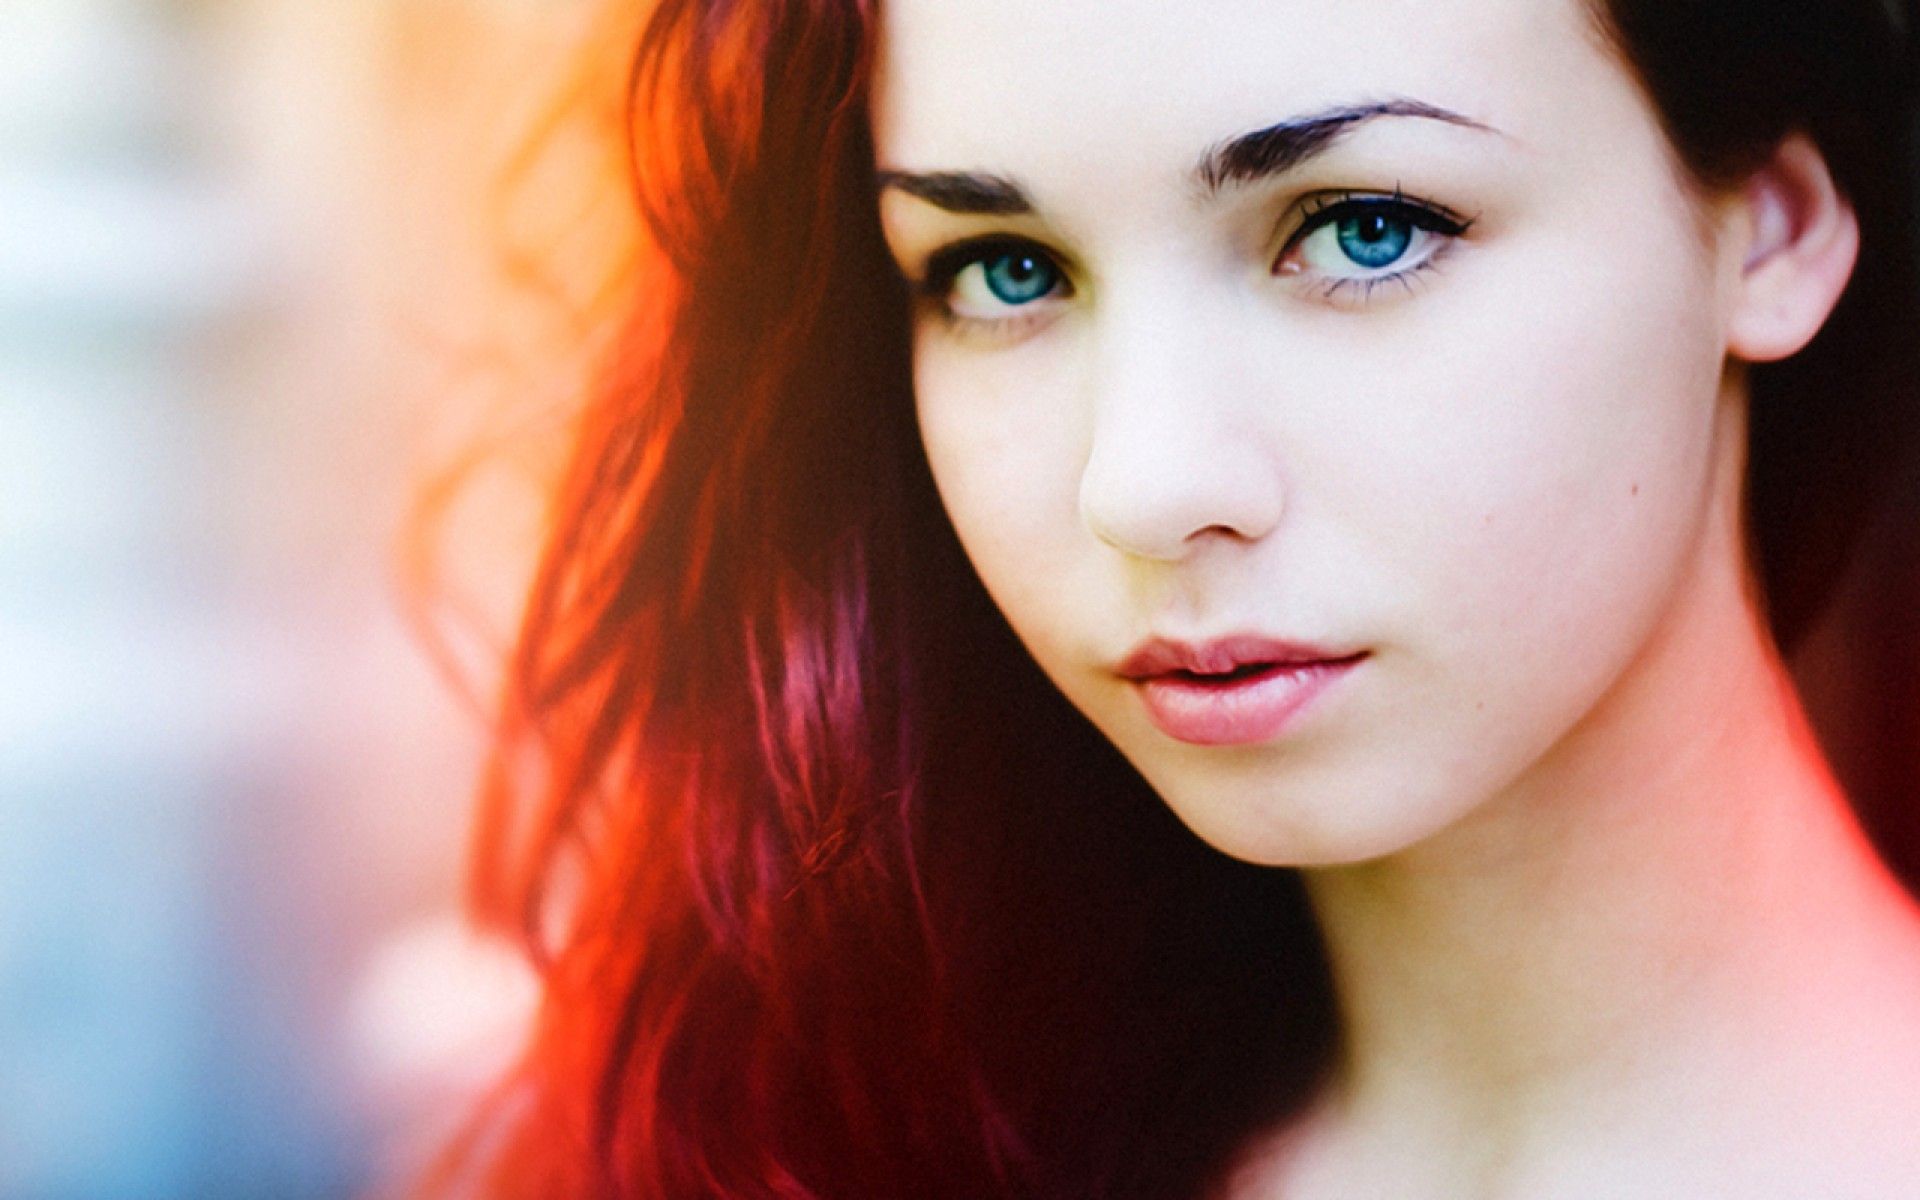 The Red Haired Girl With Blue Eyes Wallpaper And Image, Picture, Photo